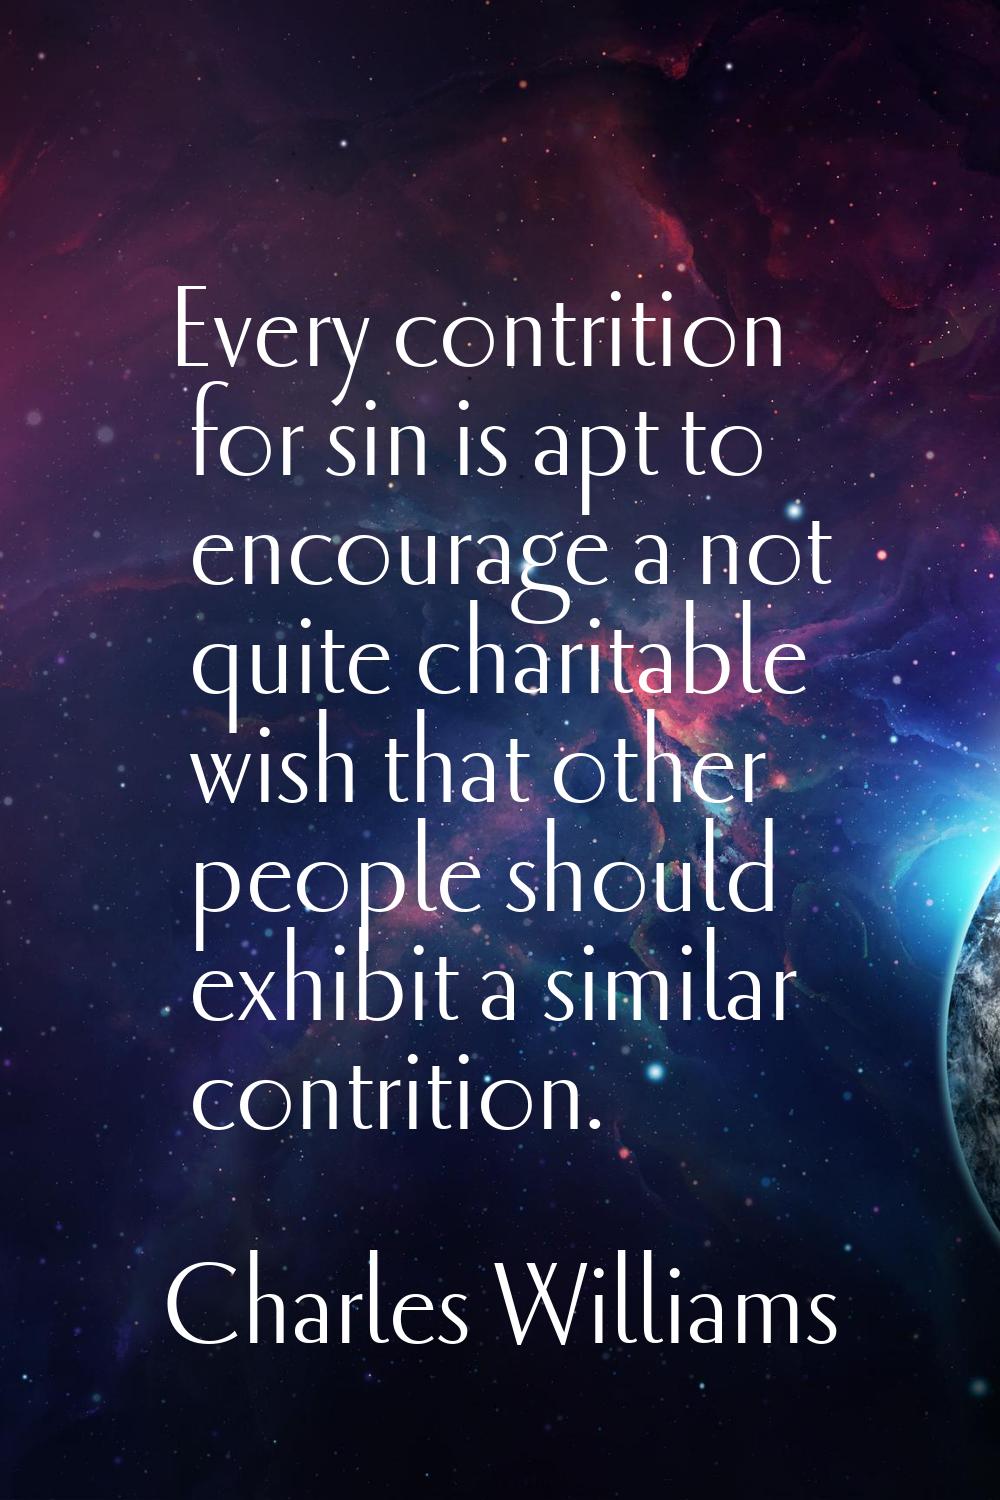 Every contrition for sin is apt to encourage a not quite charitable wish that other people should e